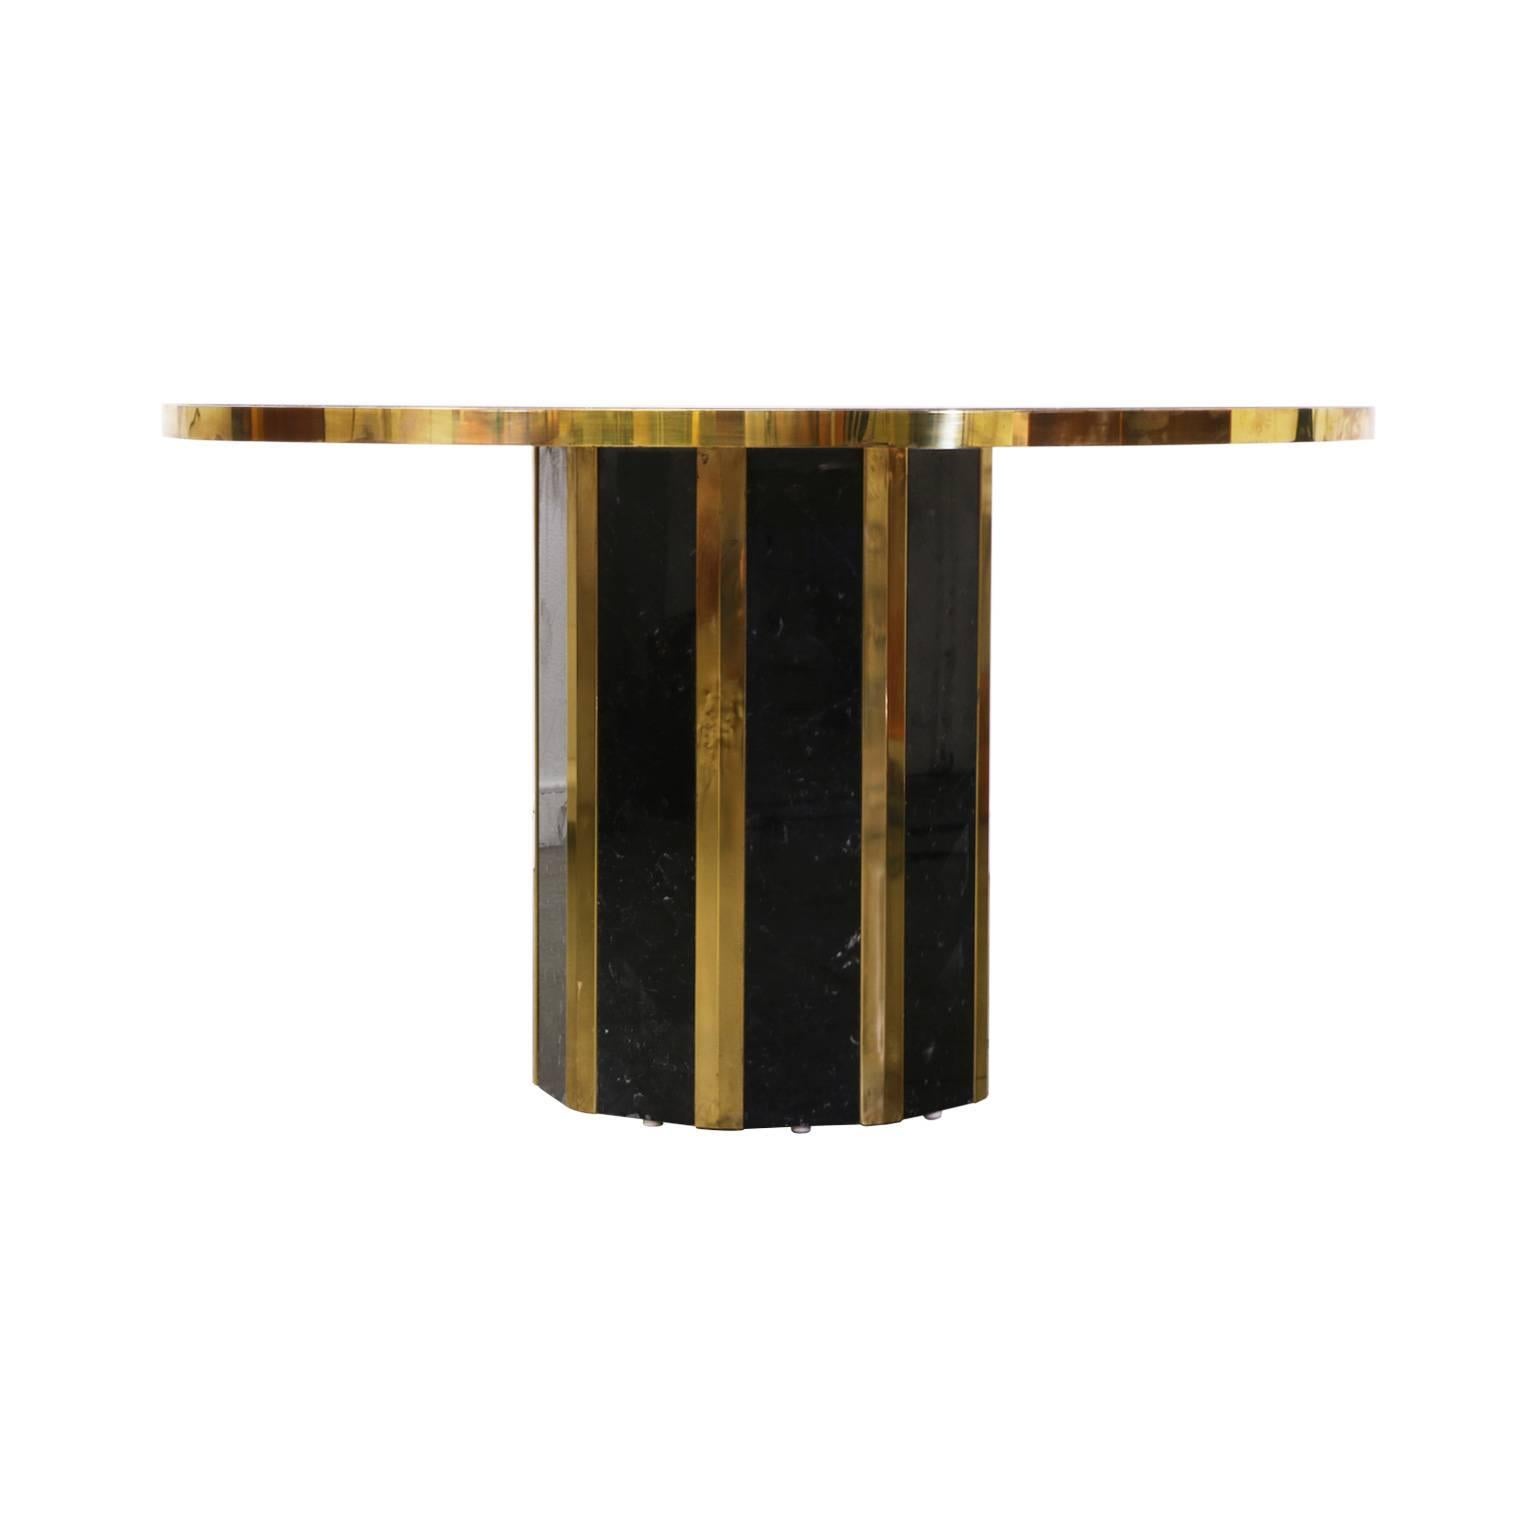 Designer: Unknown
Manufacturer: Unknown
Period/Style: Mid Century Modern
Country: United States
Date: 1970’s

Dimensions: 29″H x 50.5″W
Materials: Brass, Black Marble
Condition: Shows wear from age and use
Number of Items: 1
ID Number: 3300